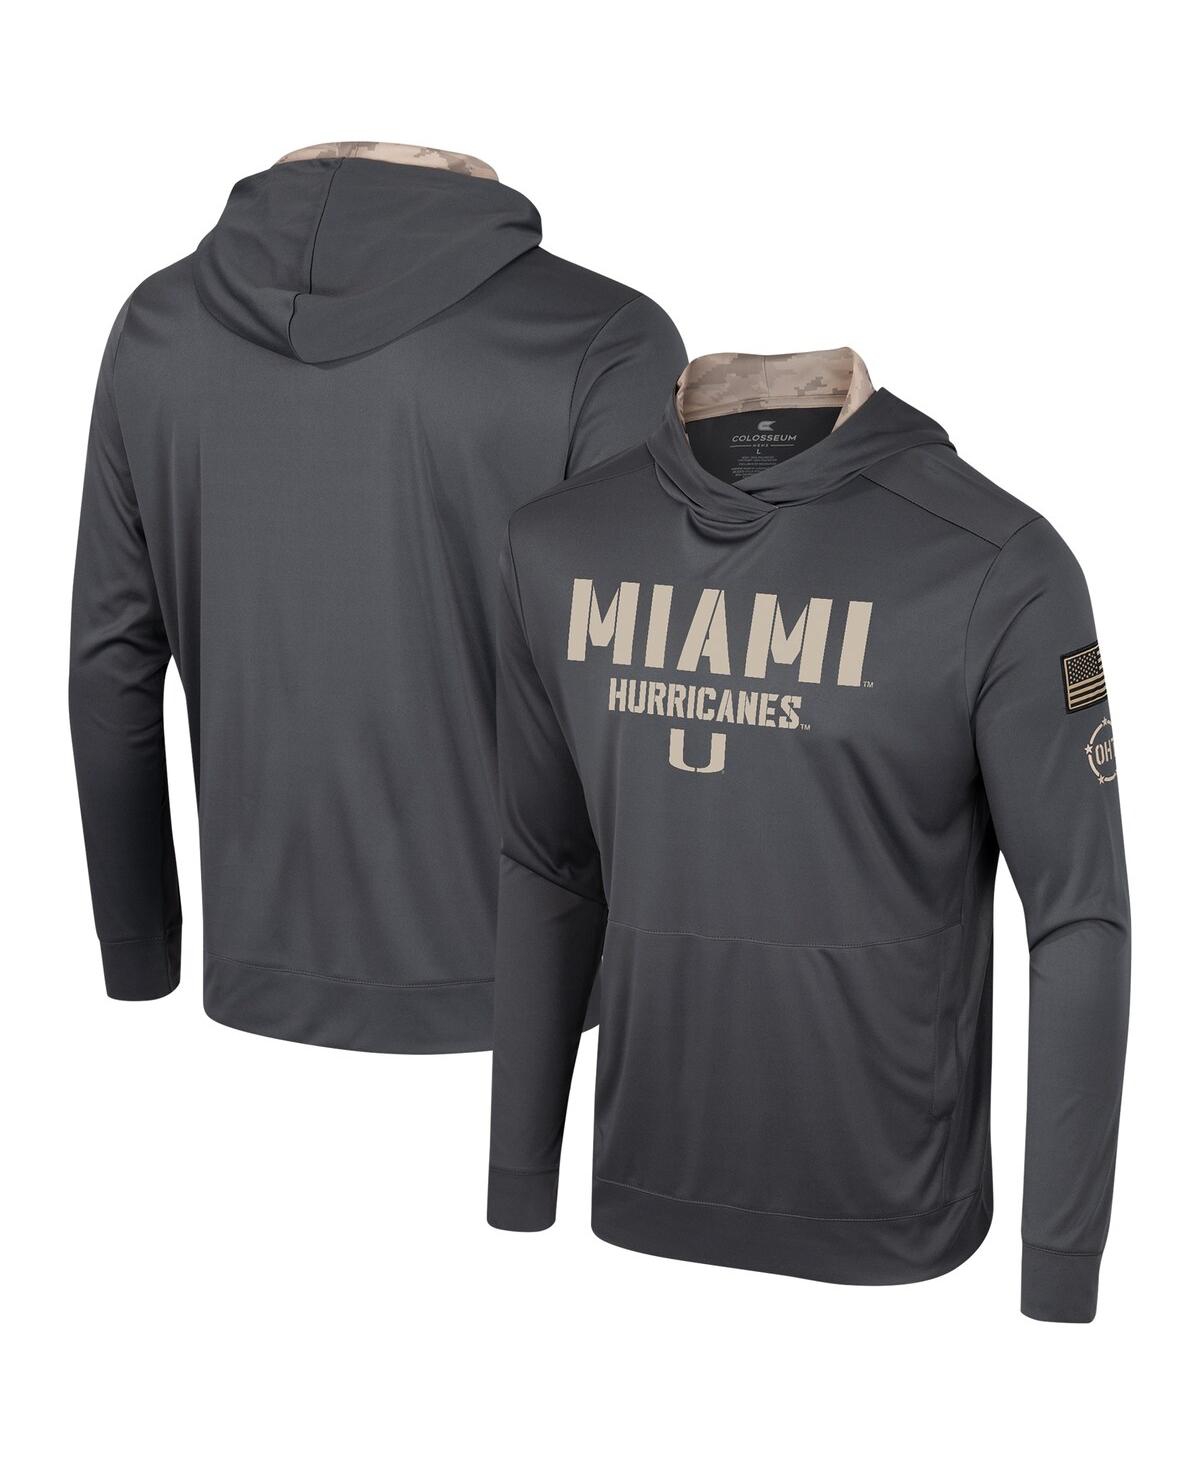 Colosseum Men's  Charcoal Miami Hurricanes Oht Military-inspired Appreciation Long Sleeve Hoodie T-sh